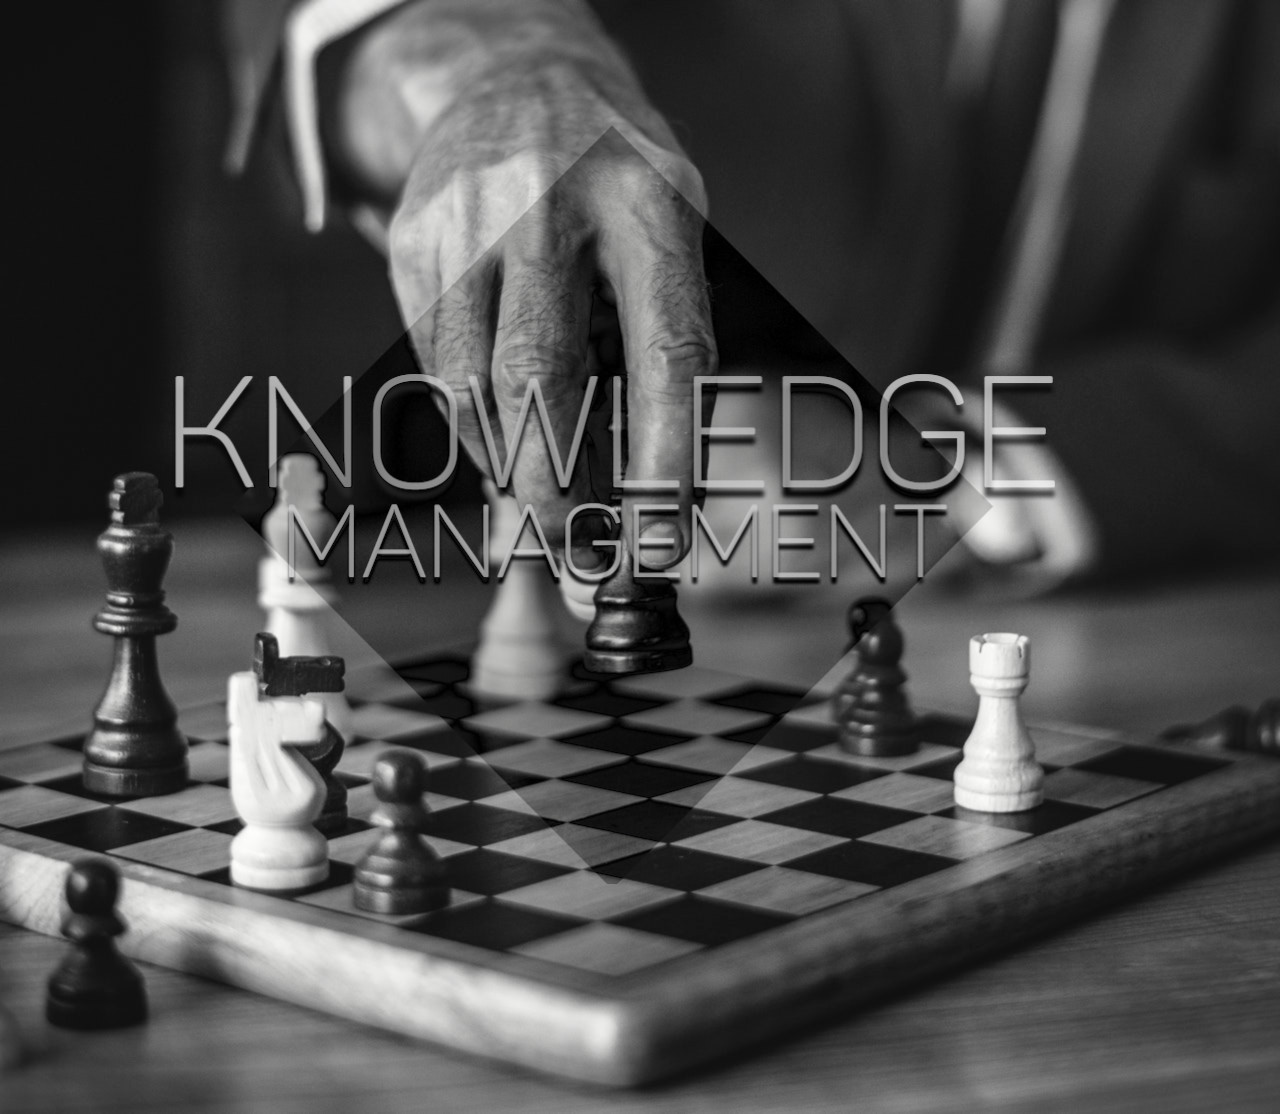 learn knowledge,3 theories of learning,difference between teaching and training,knowledge learning center,knowledge management strategy pdf,what is knowledge management,knowledge and learning management,knowledge management book pdf,learning resources